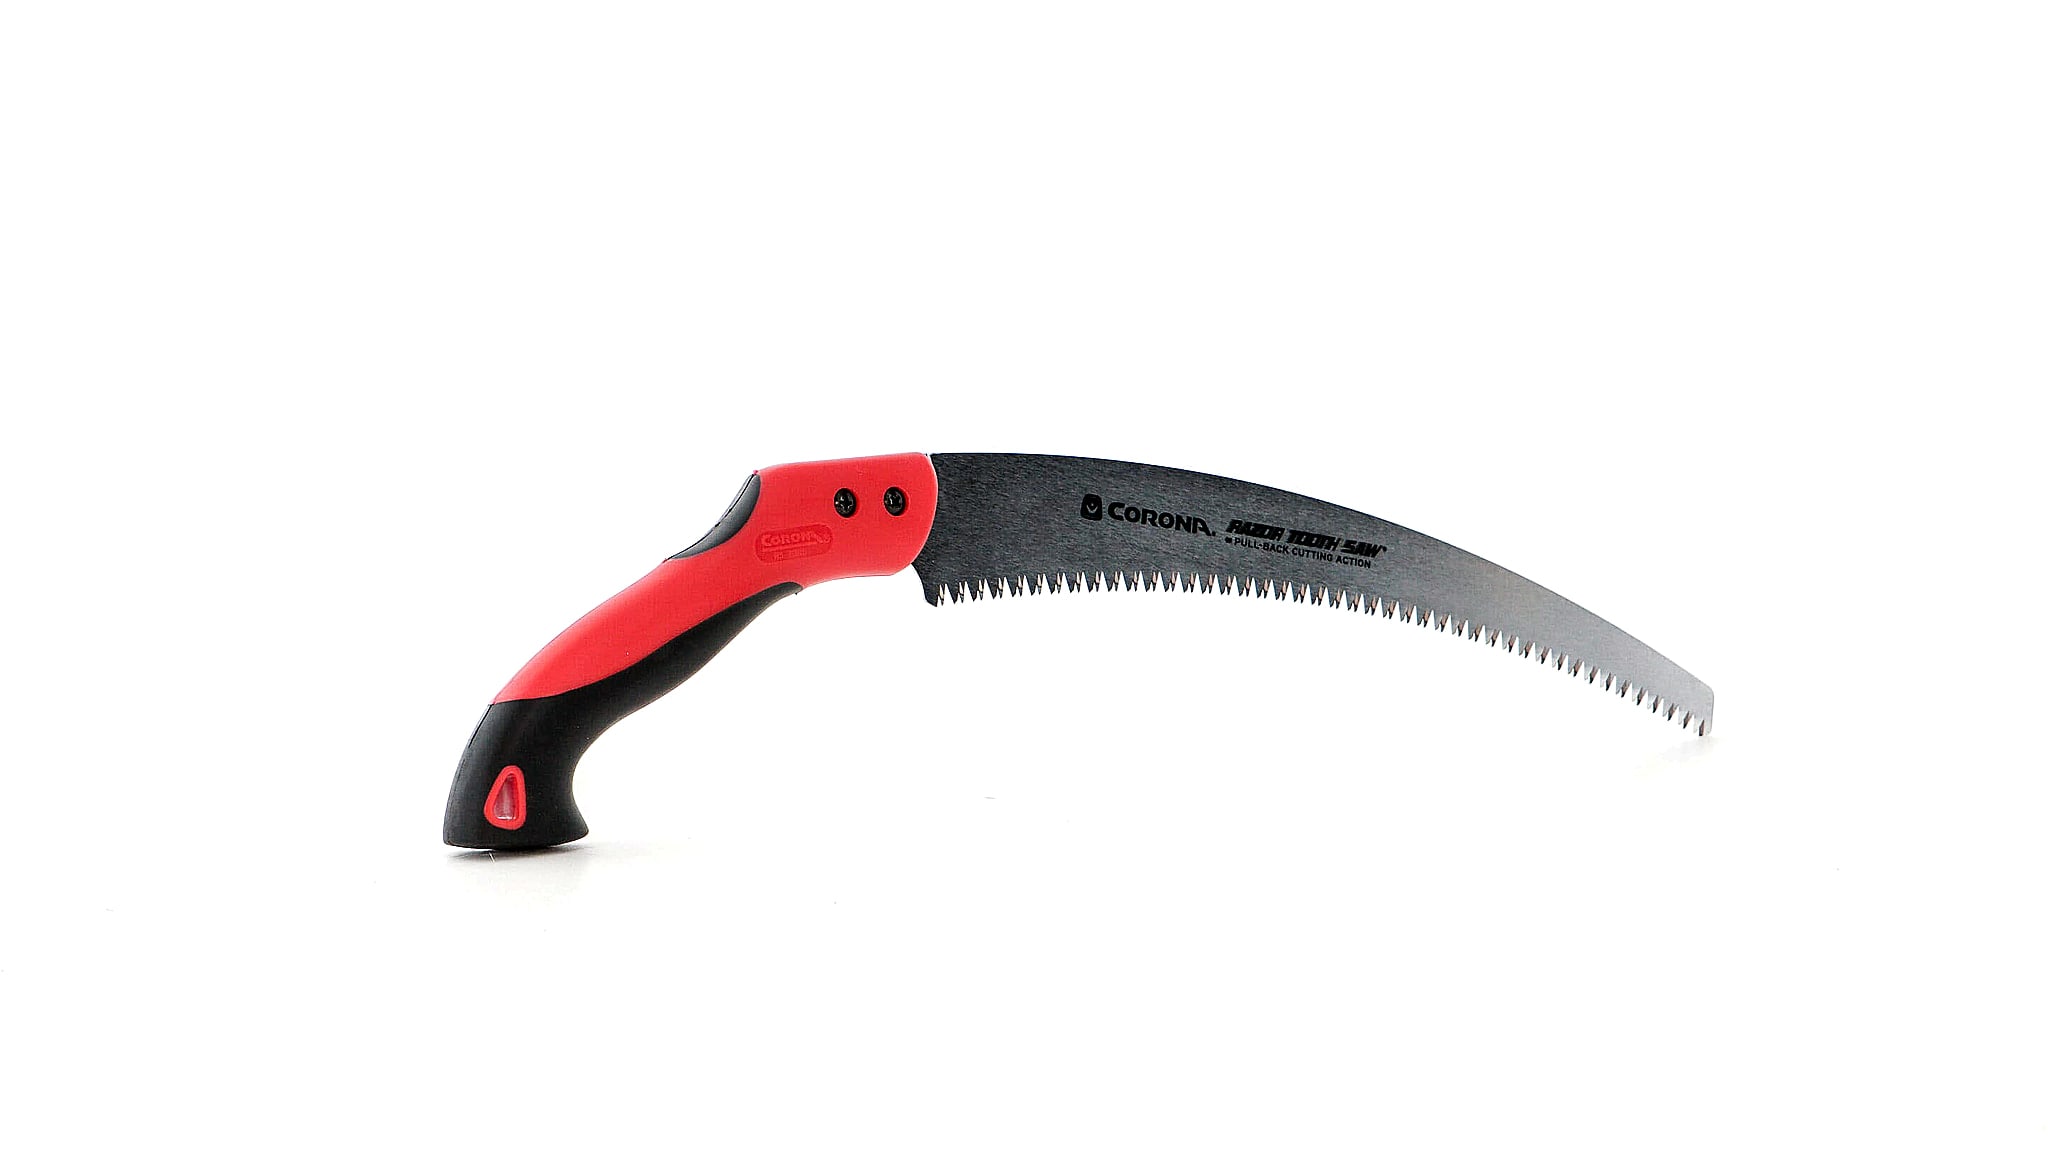 NEW Coopertools NICHOLSON 80263 14-Inch Curved Prunning Saw 6473359 